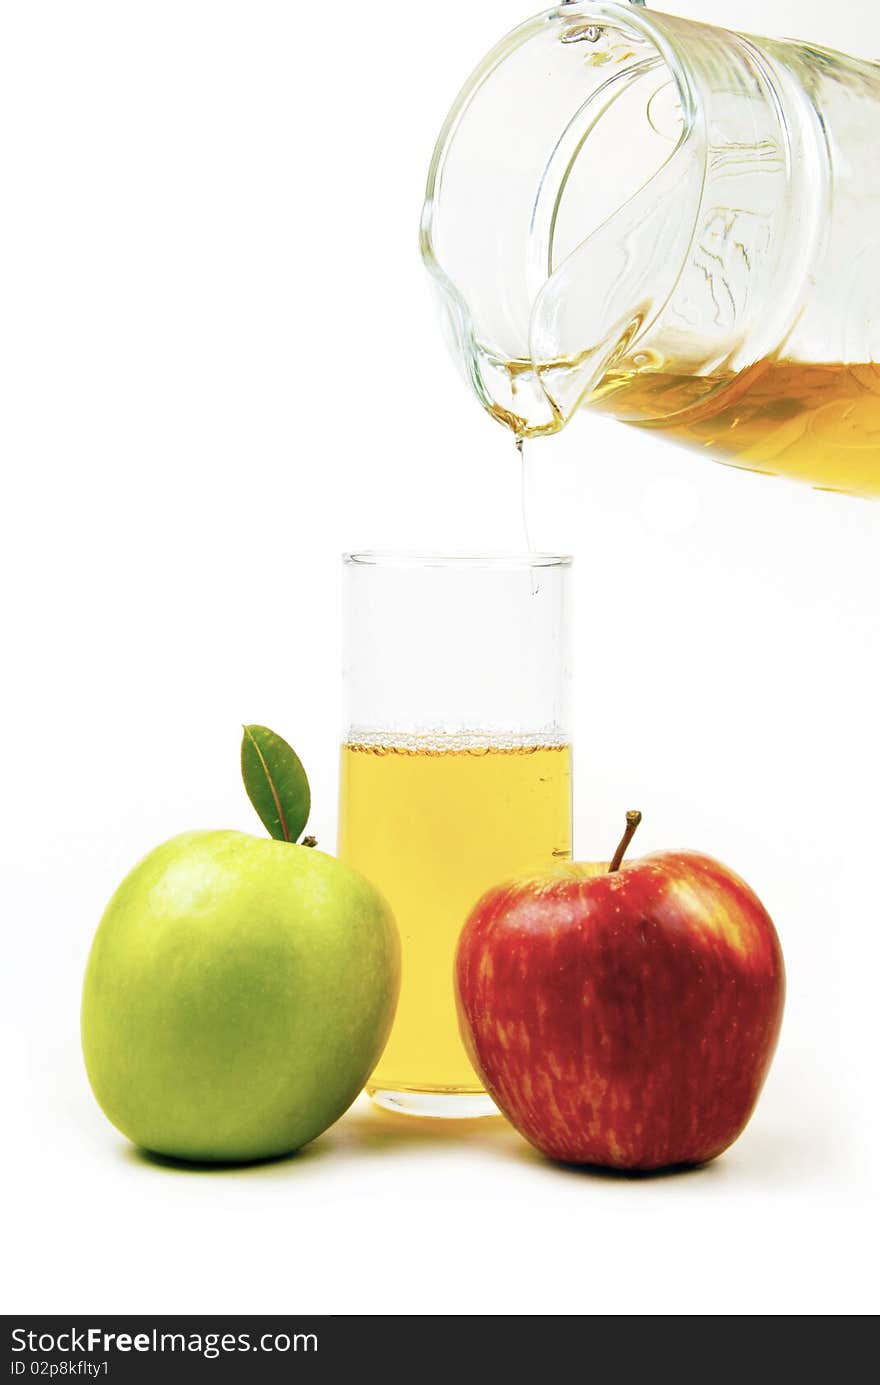 A glass of fresh apple juice with apples in the foreground